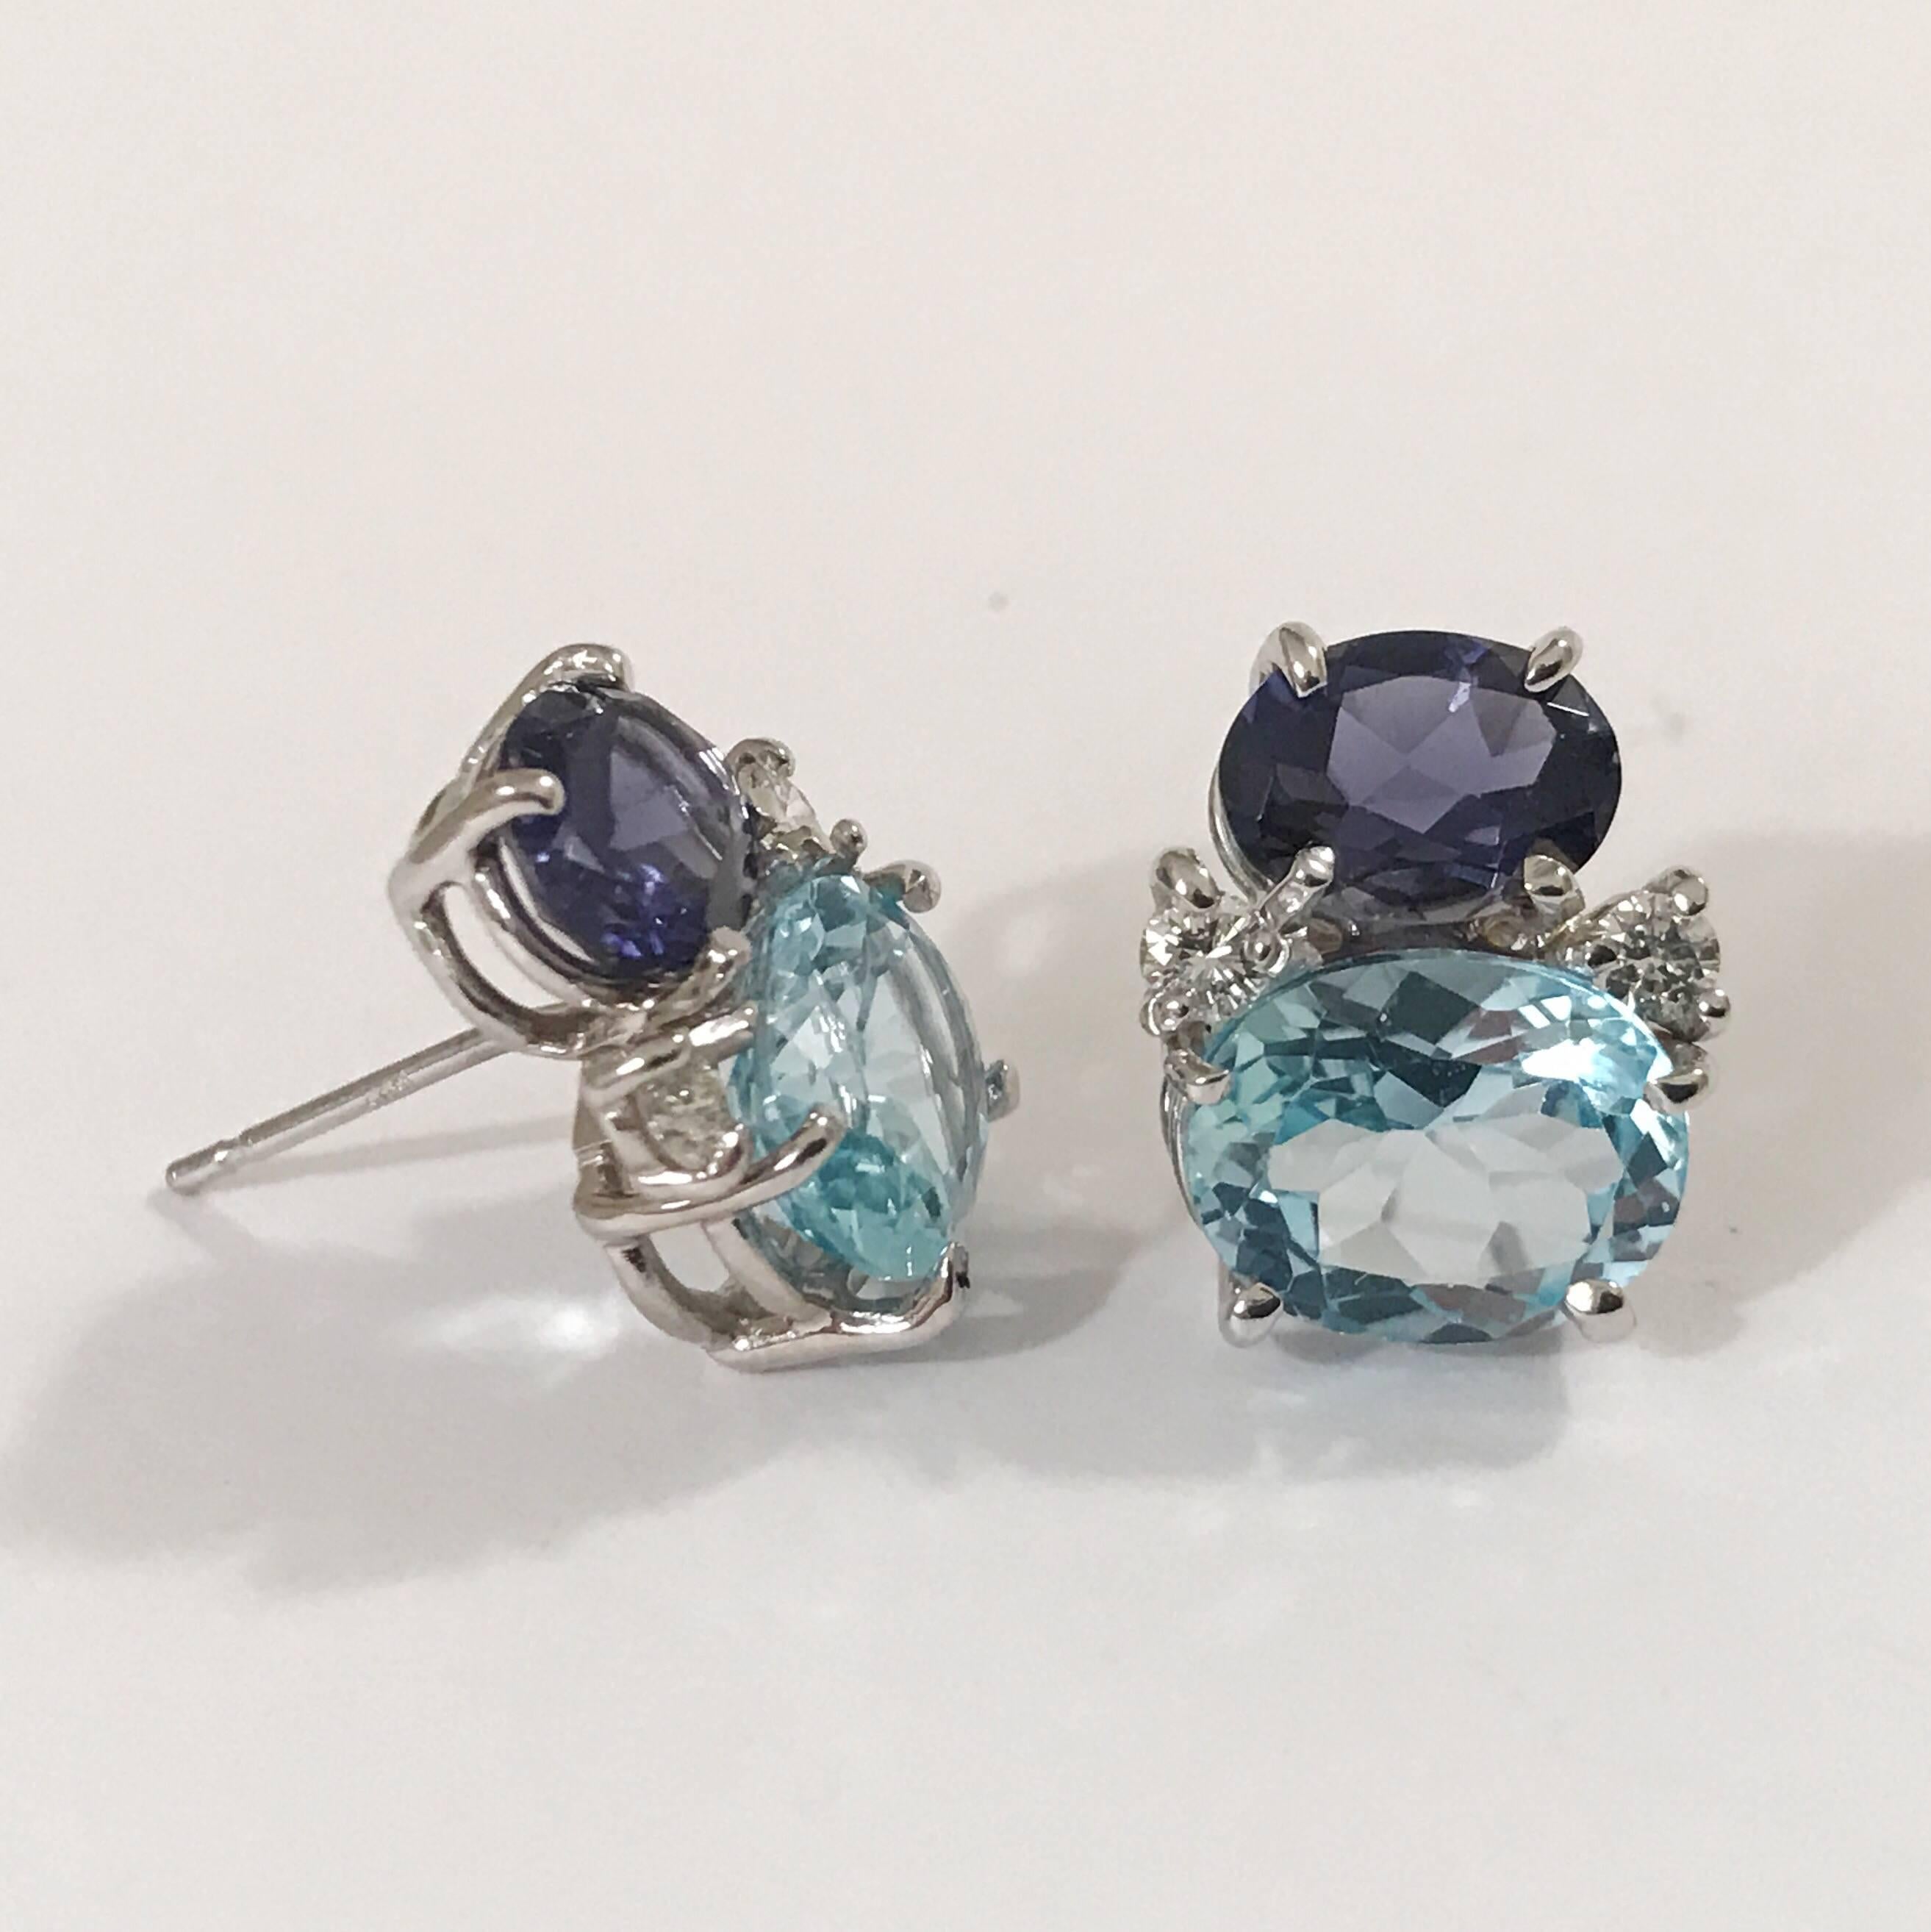 Mini 18kt white gold GUM DROP™ earrings with faceted Iolite (approximately 2 cts each), Faceted Pale Blue Topaz (approximately 3 cts each), and 4 diamonds weighing ~ 0.20 cts. 
Specifications: Height: 5/8